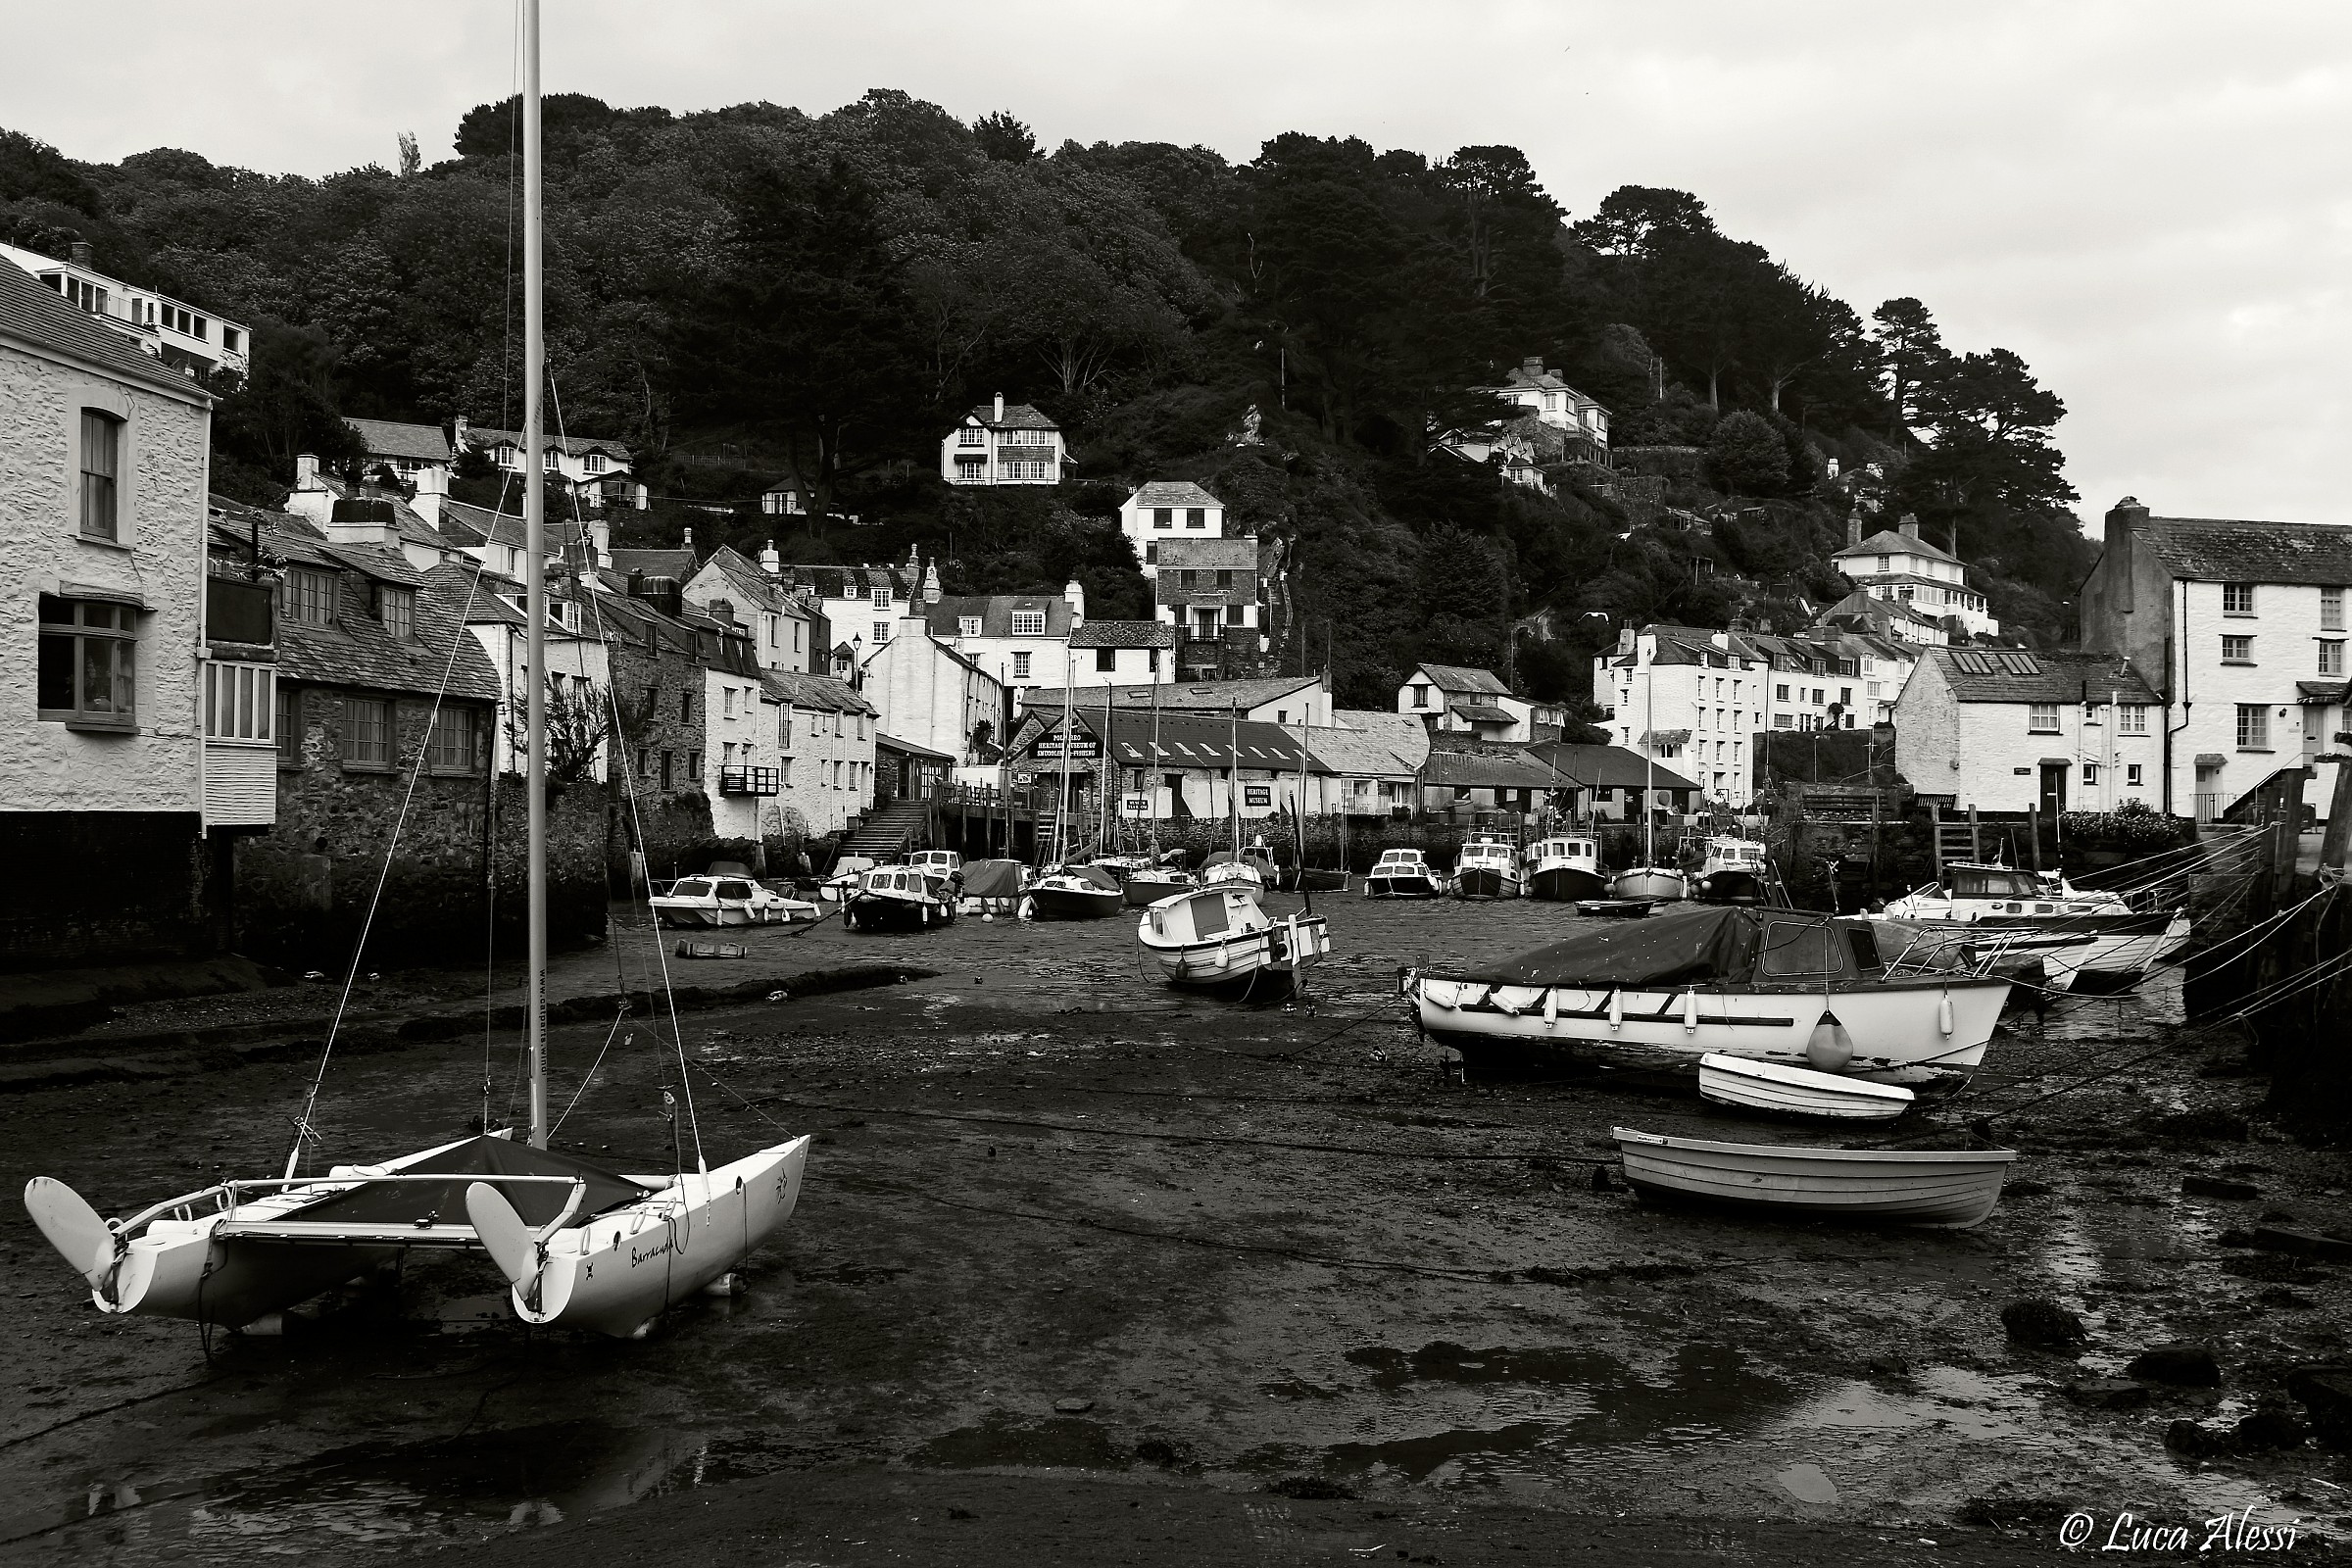 Polperro with low tide...